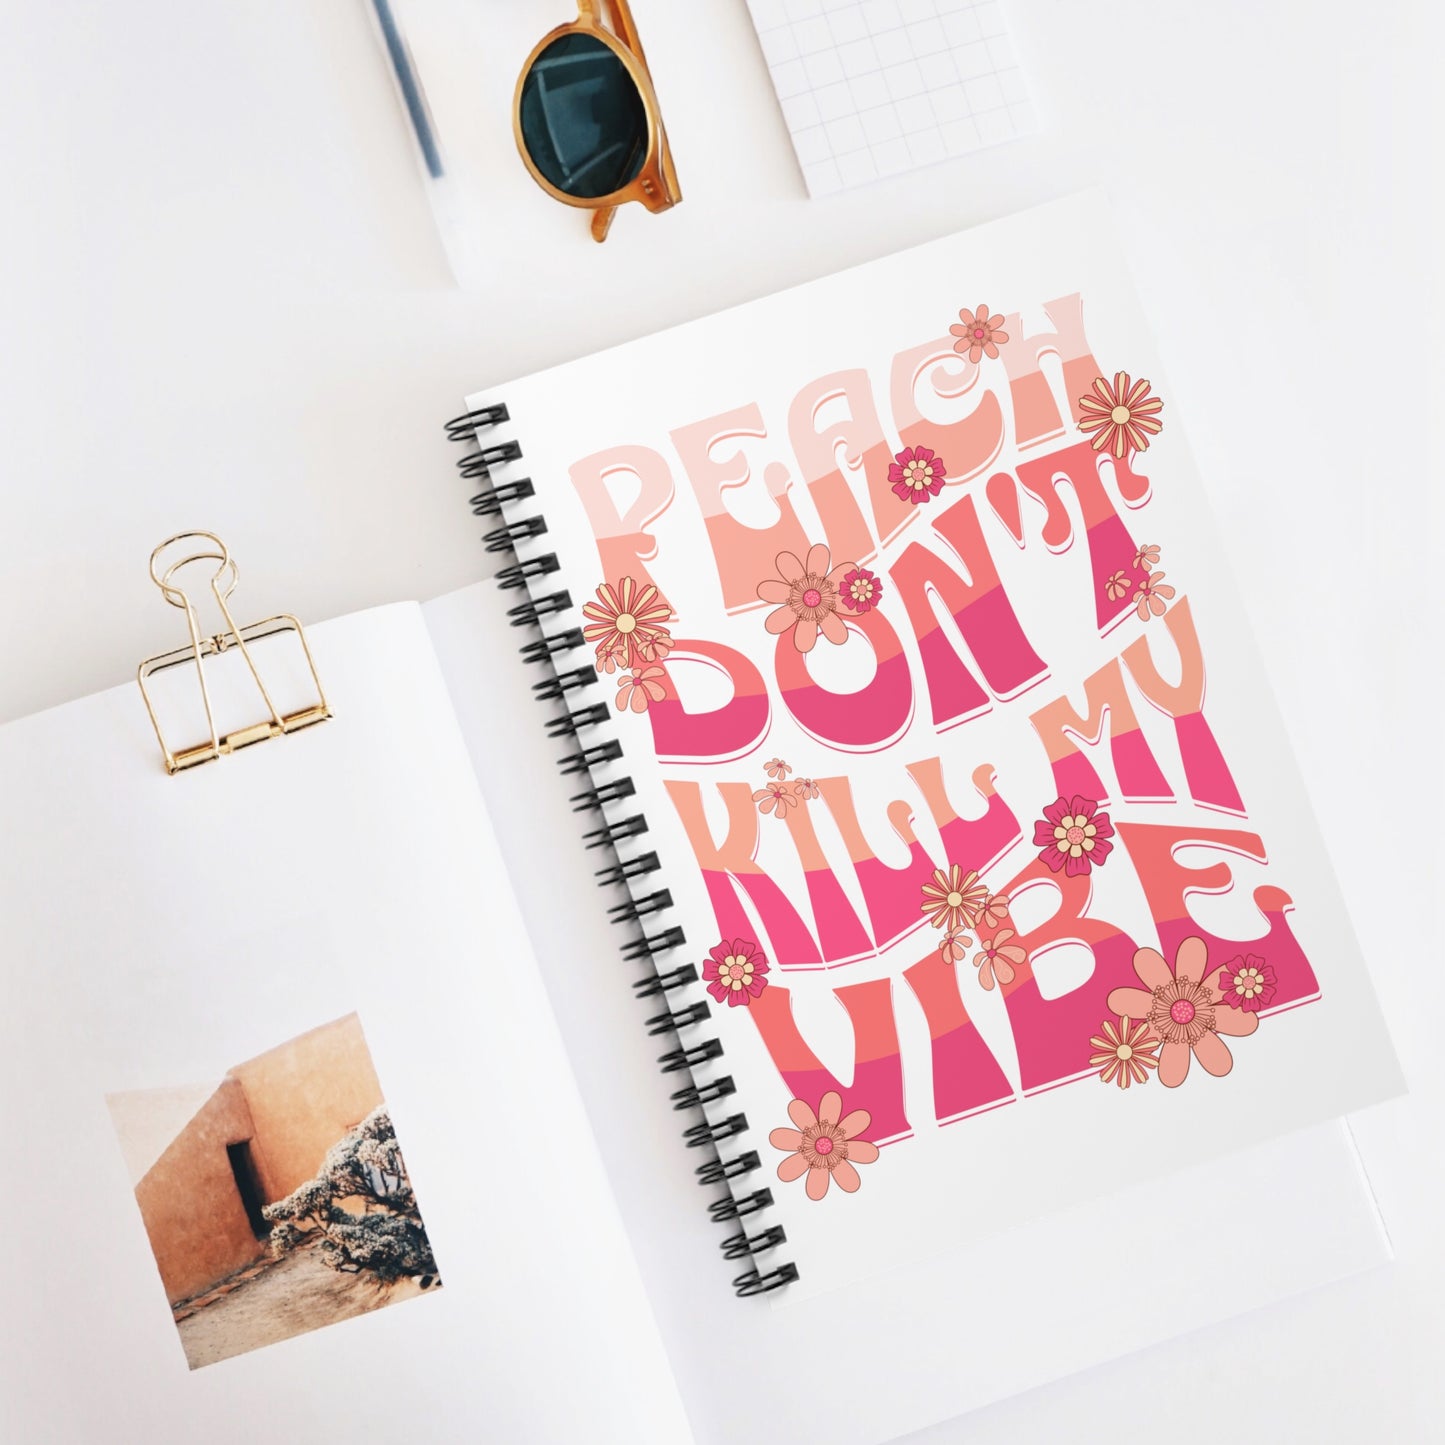 Peach Don't Kill My Vibe Spiral Notebook - Ruled Line